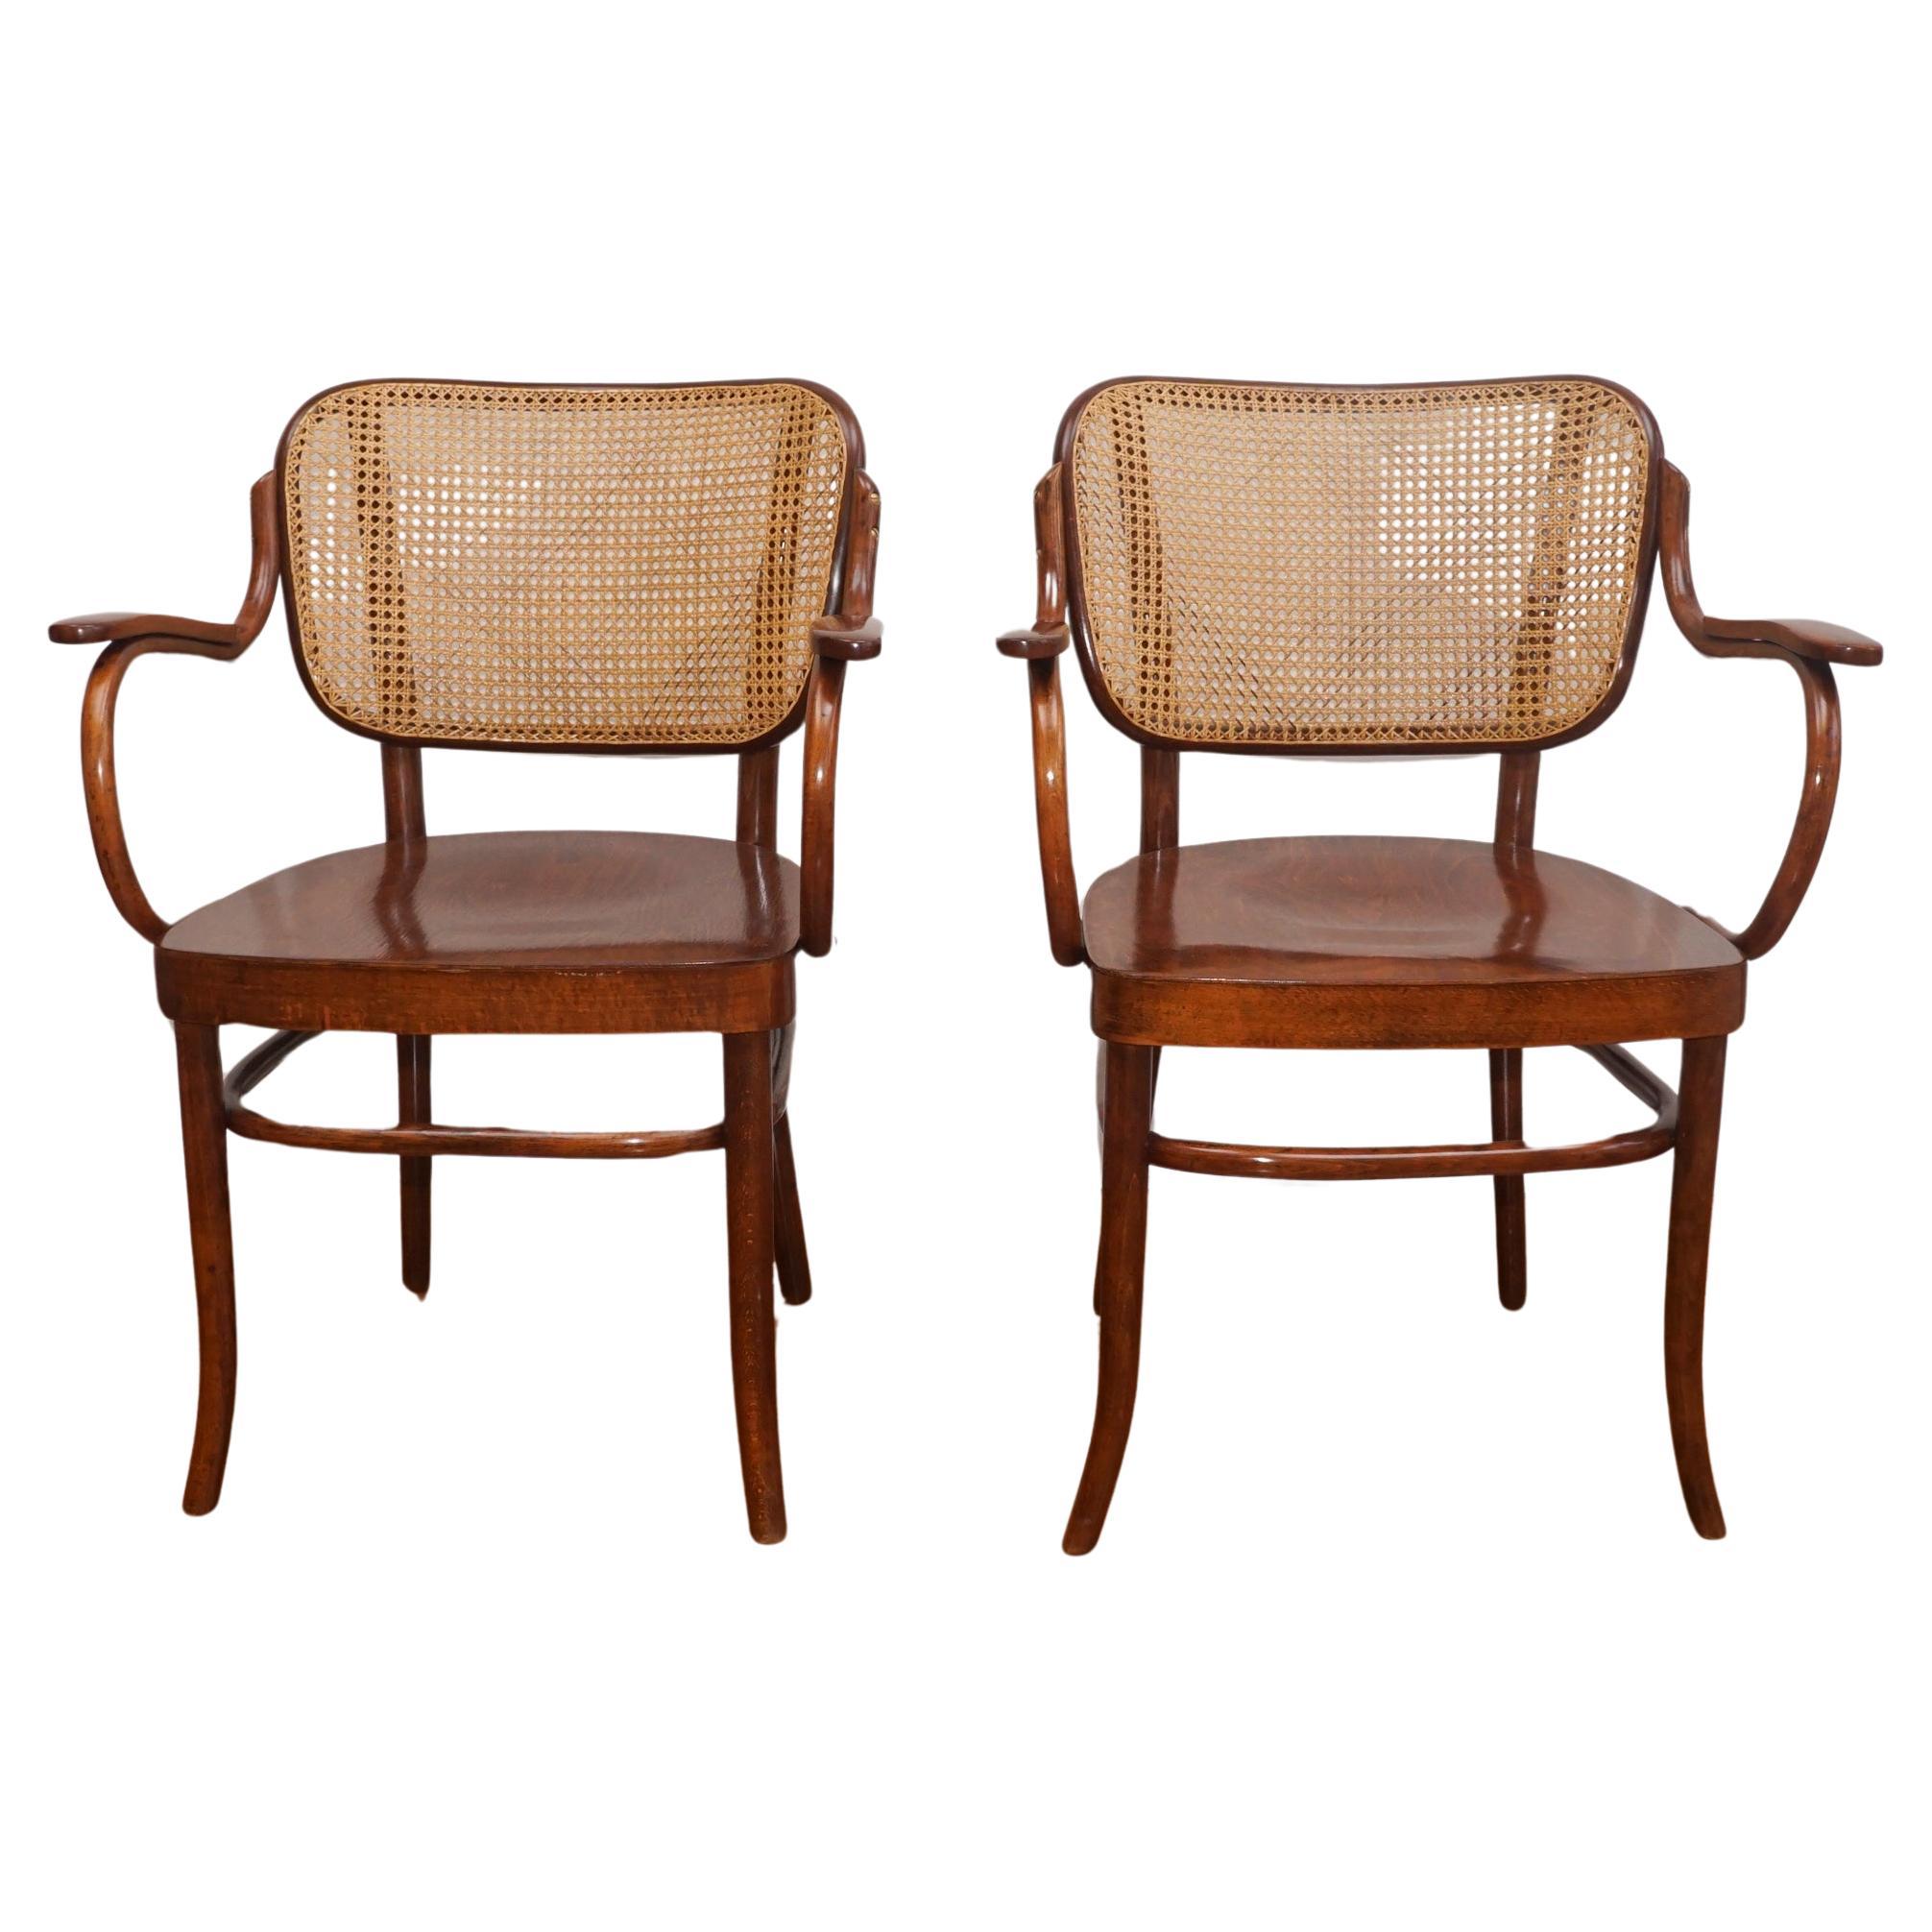 Pair of Thonet Bentwood Chairs